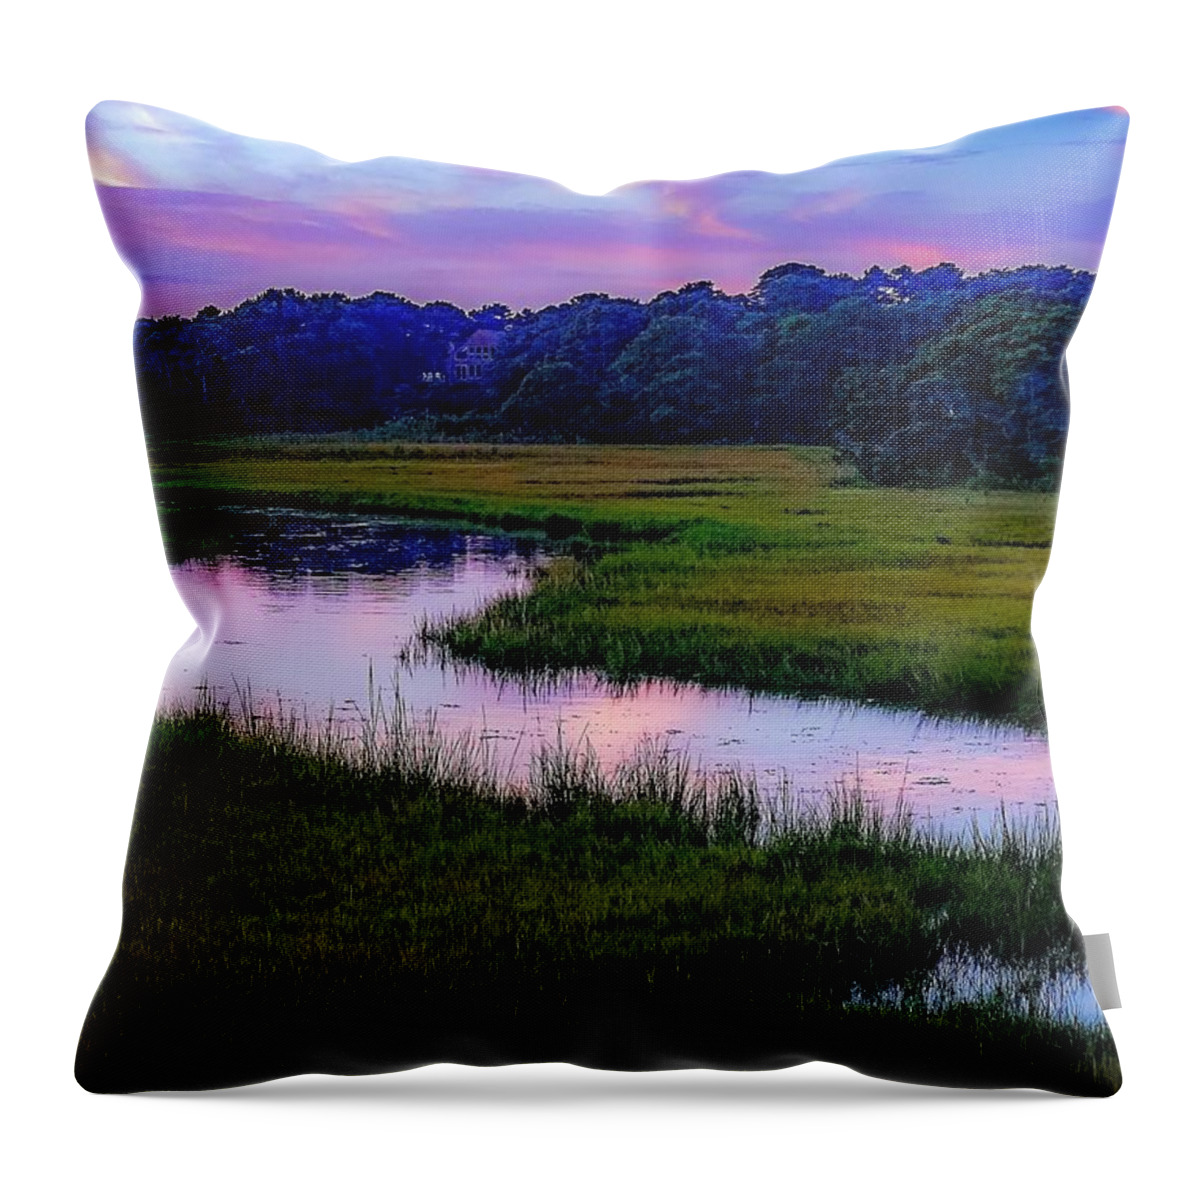  Throw Pillow featuring the photograph Cape Light by Kendall McKernon